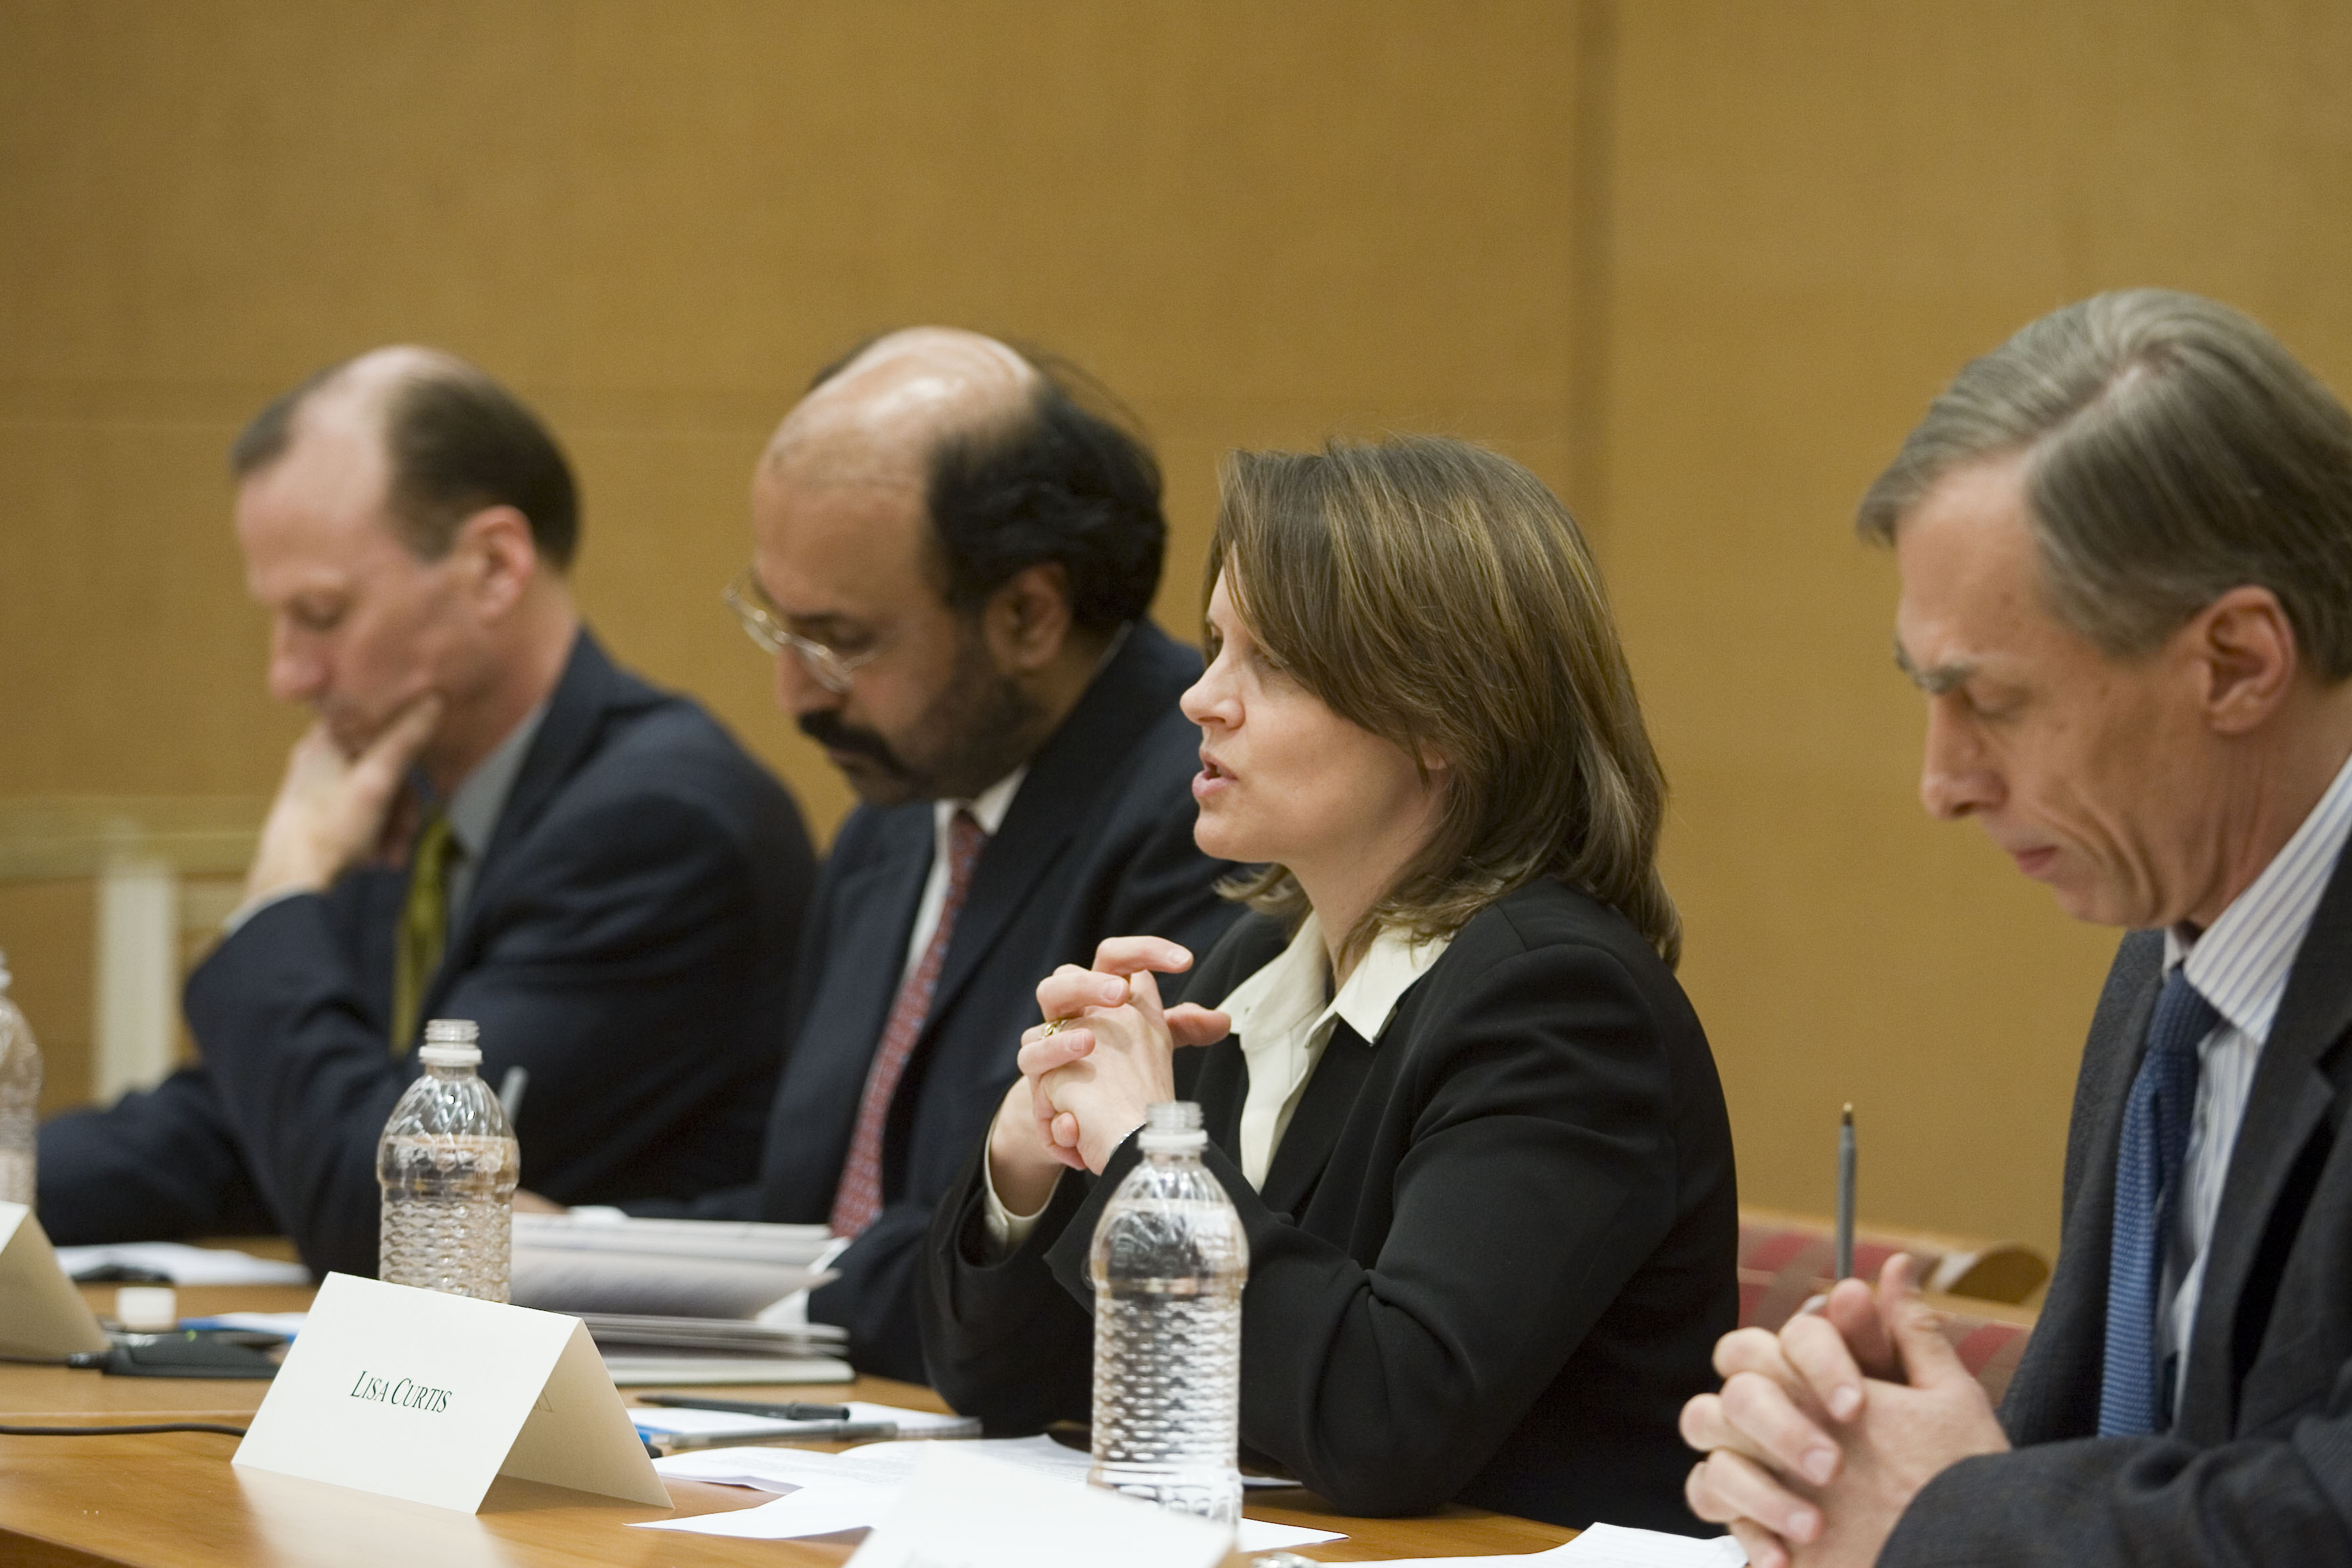 Jeff Legro, Hassan Abbas, Lisa Curtis, John Echeverri-Gent sit at a table during a panel discussion